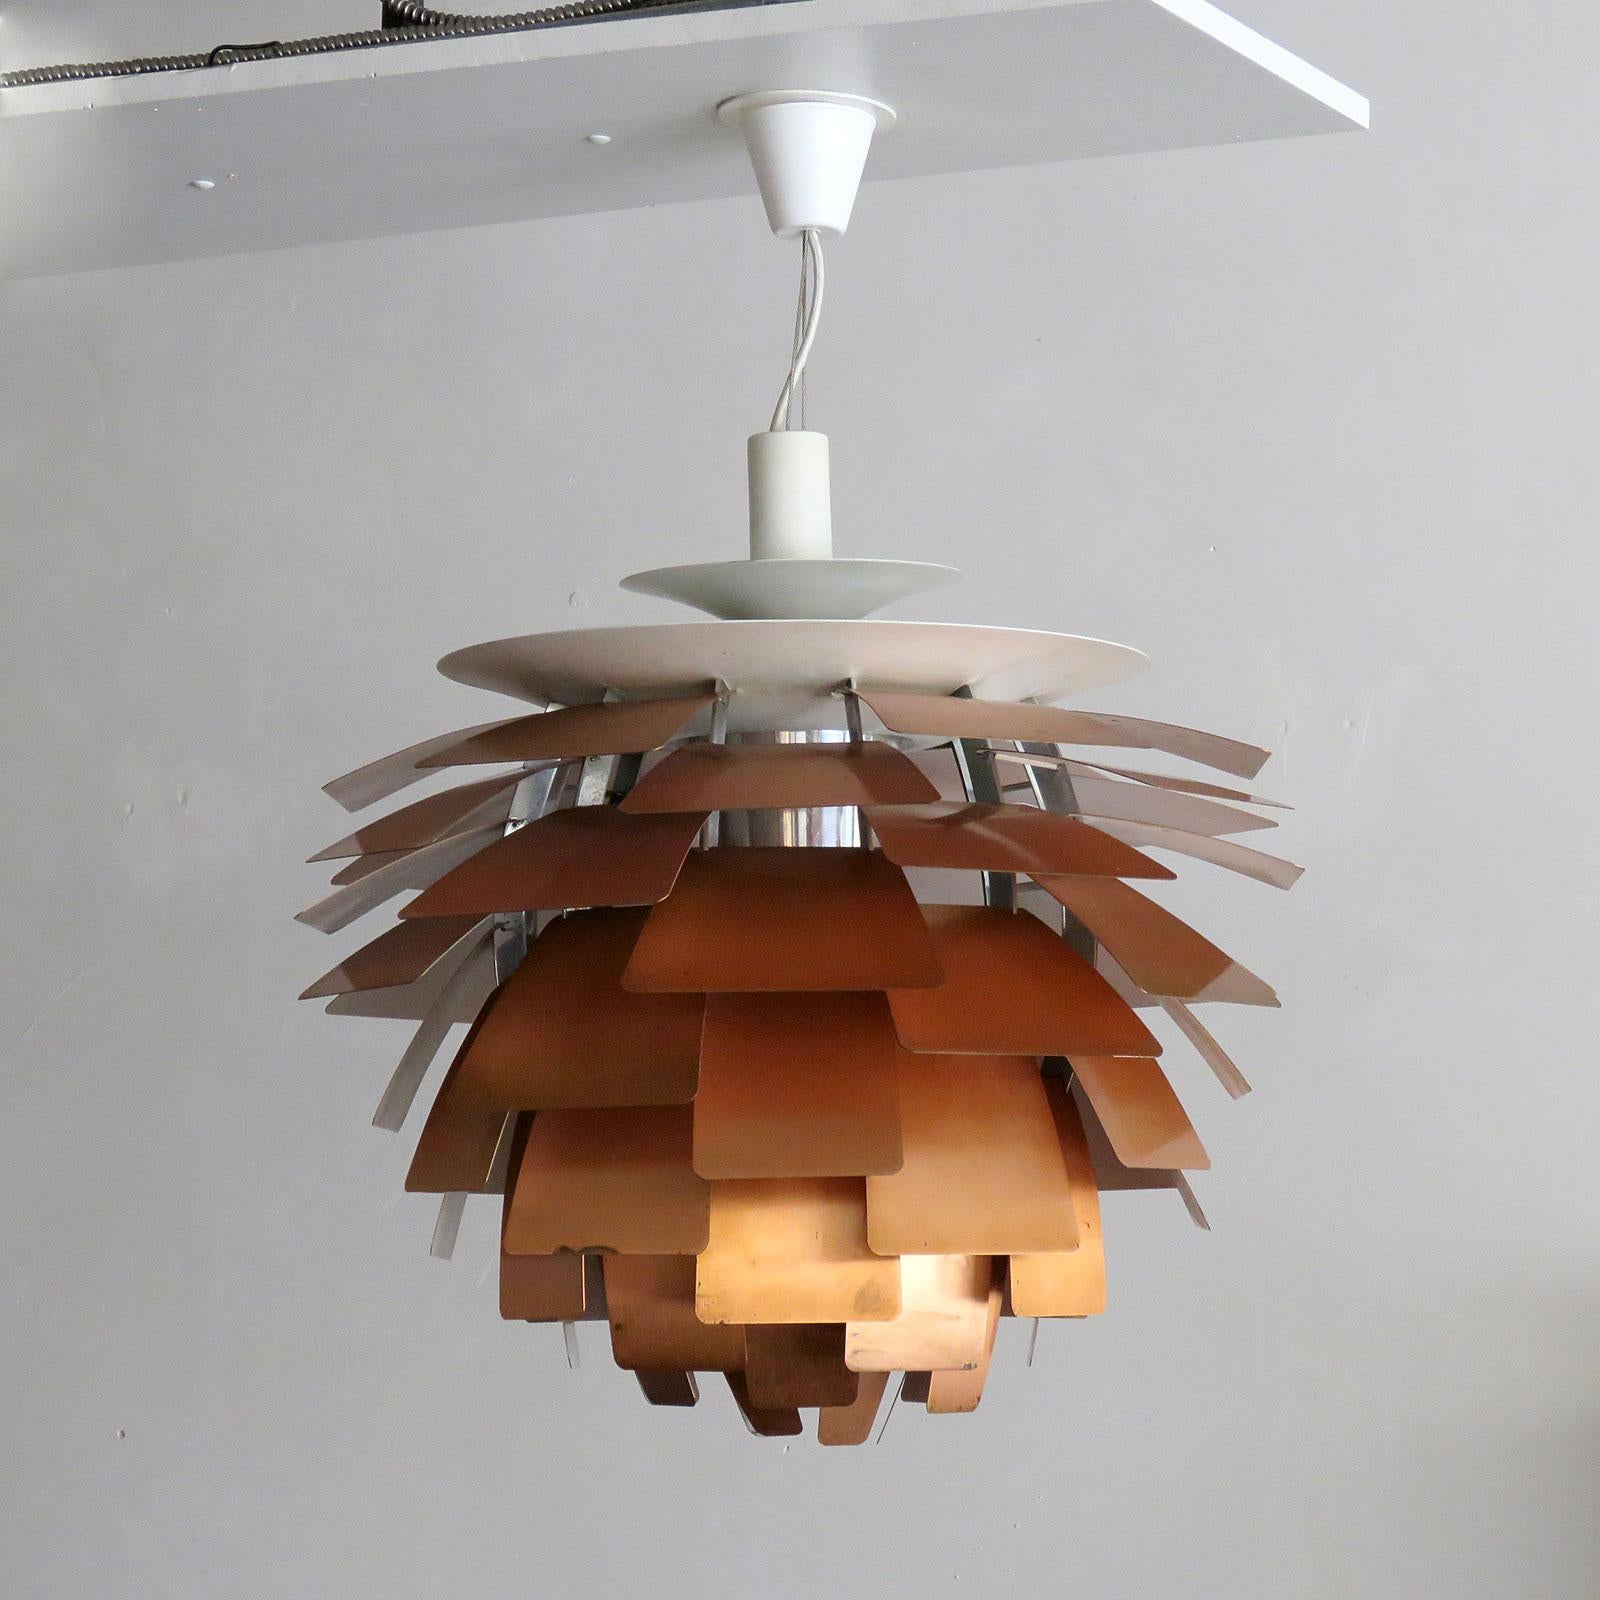 Large-scale iconic brushed copper hanging pendant lamp by Poul Henningsen (60cm), manufactured by Louis Poulsen, Denmark. PH Artichoke (1958) with single point suspension, is a 360-degree glare free luminaire created by 72 copper leaves, which